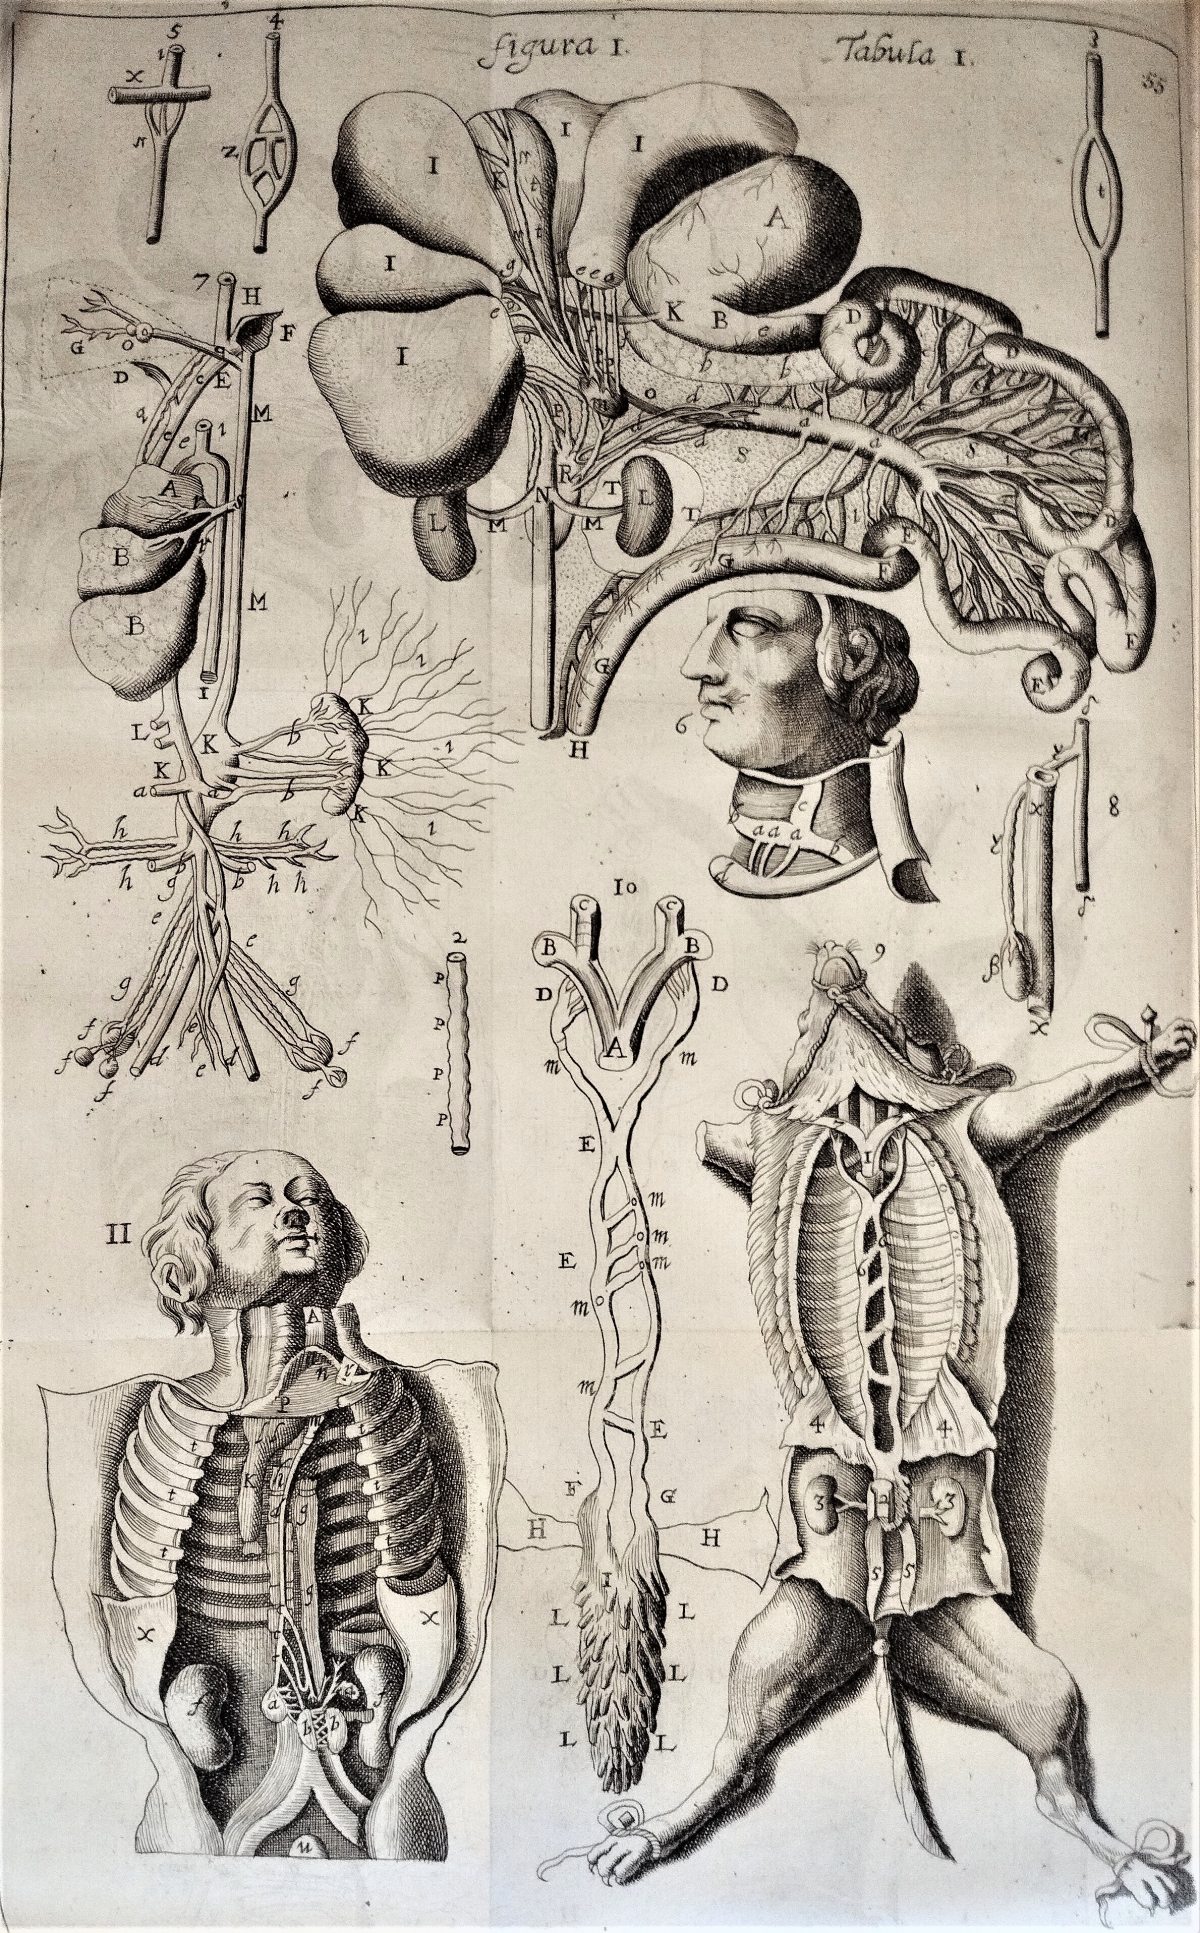 A leaf of plates in a 17th-century printed book, with engraved illustrations of human and canine thoracic anatomy.